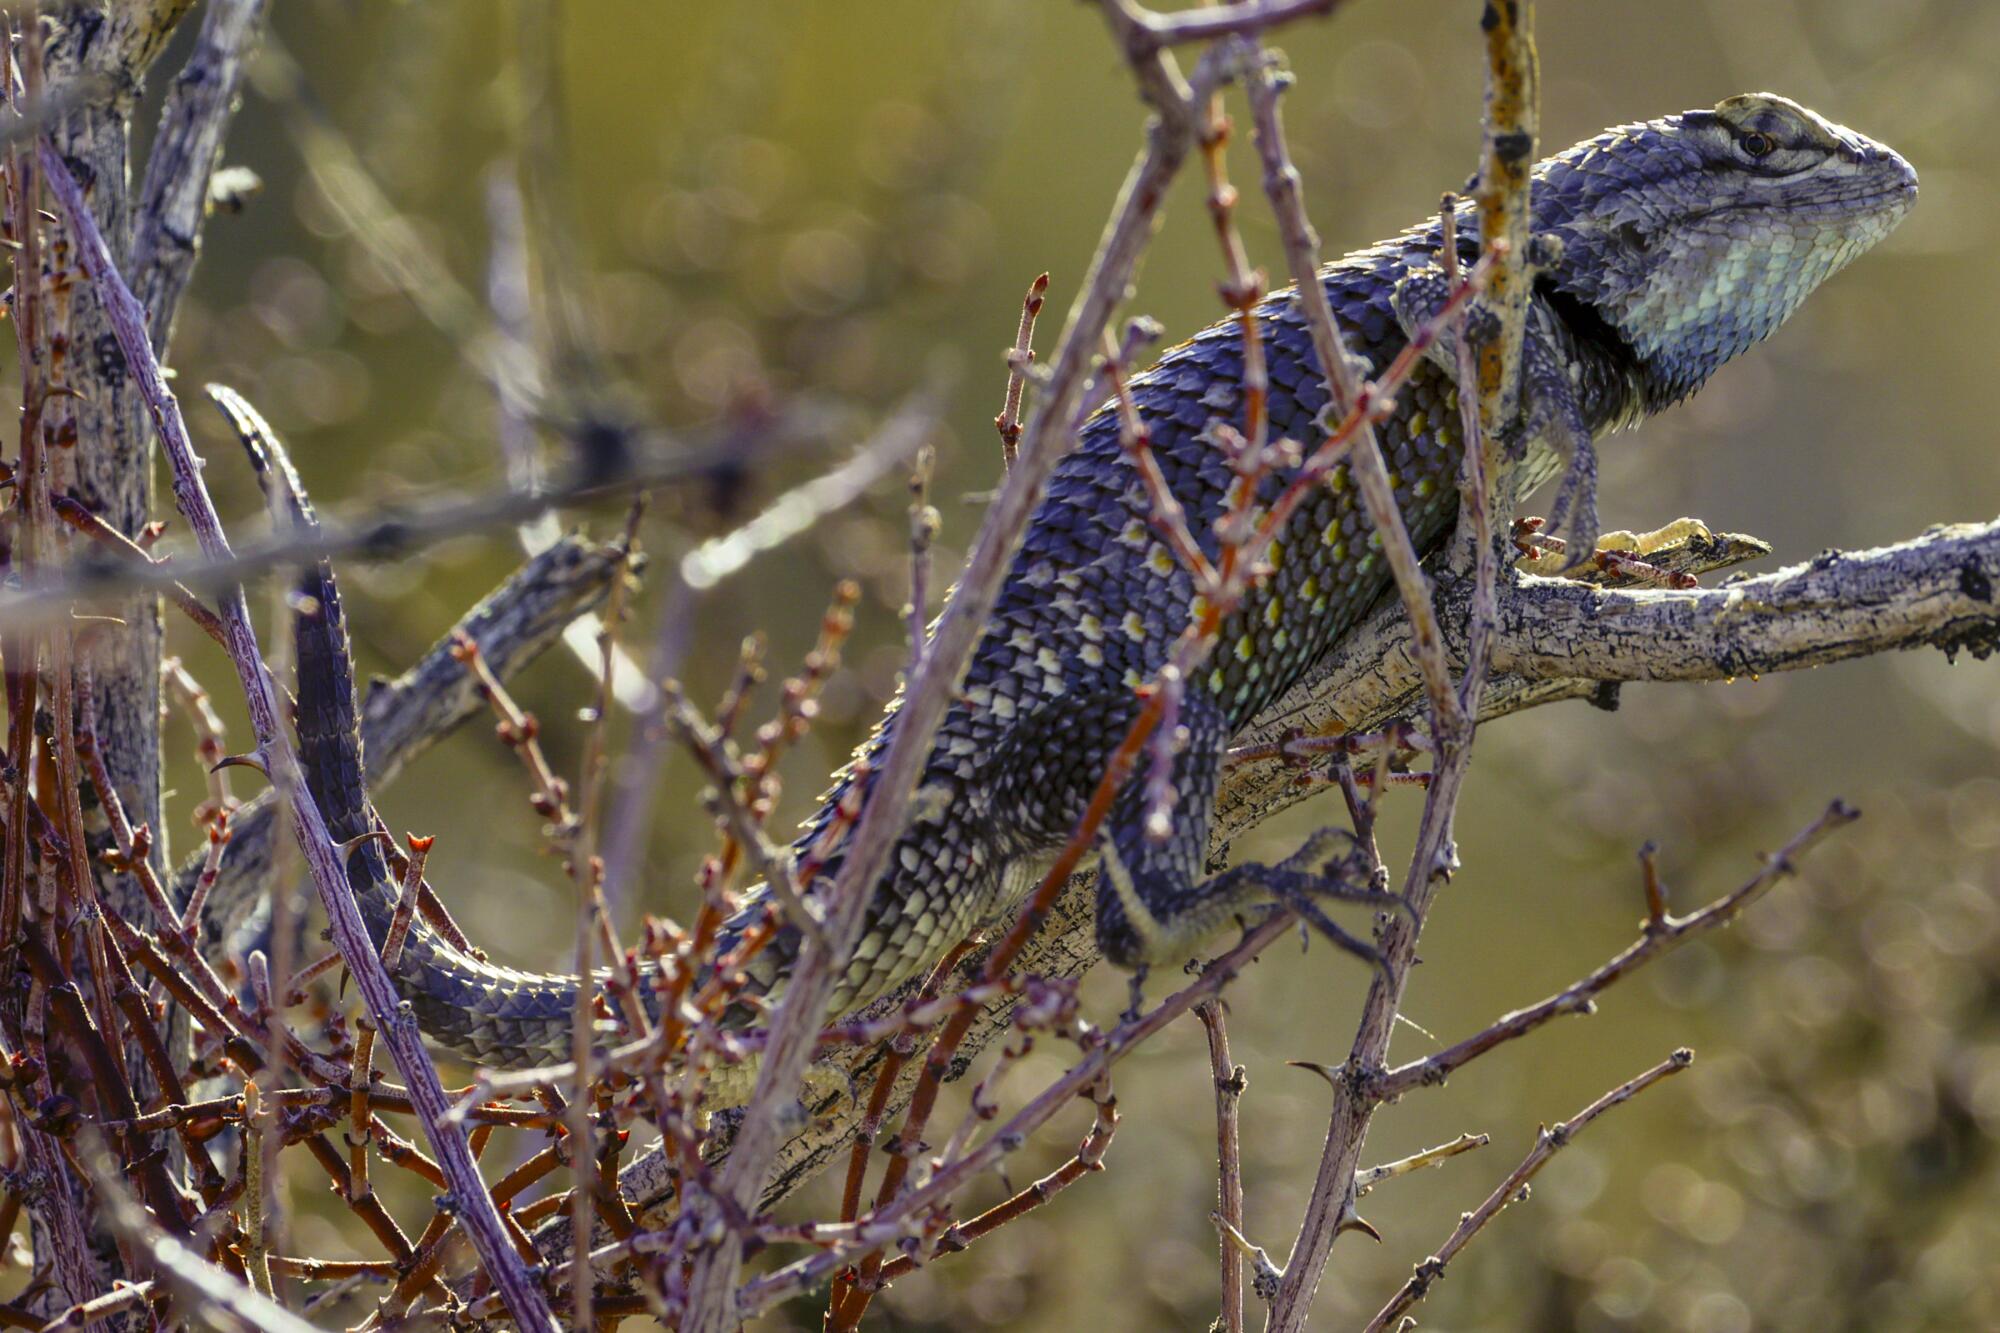 A Lizard Clings To The Branches Of A Bush.